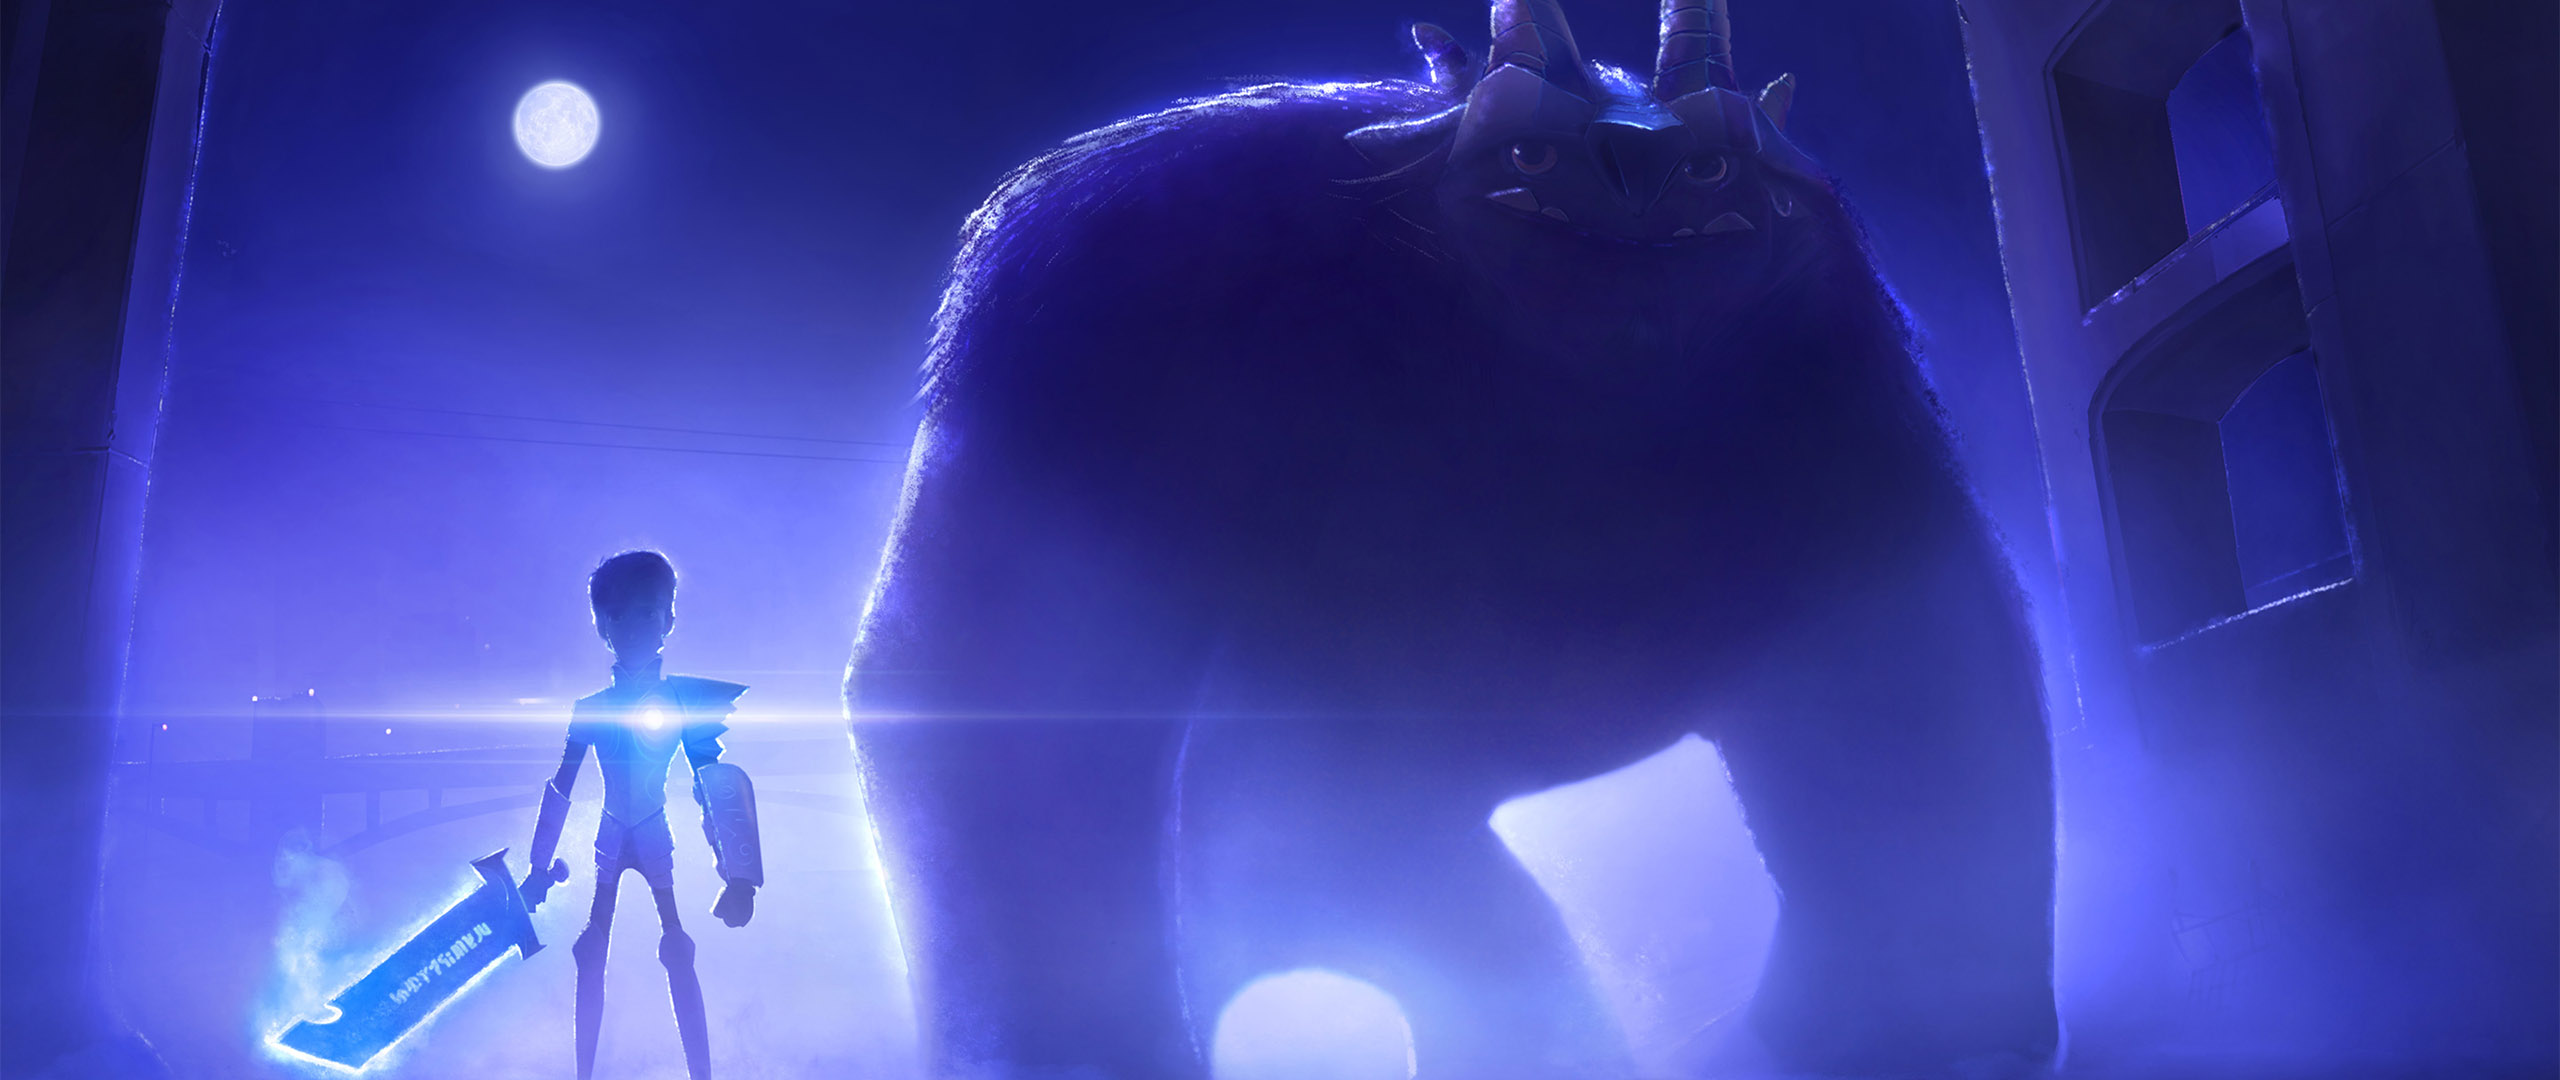 Trollhunters Movie Poster Dreamworks Animation Monster